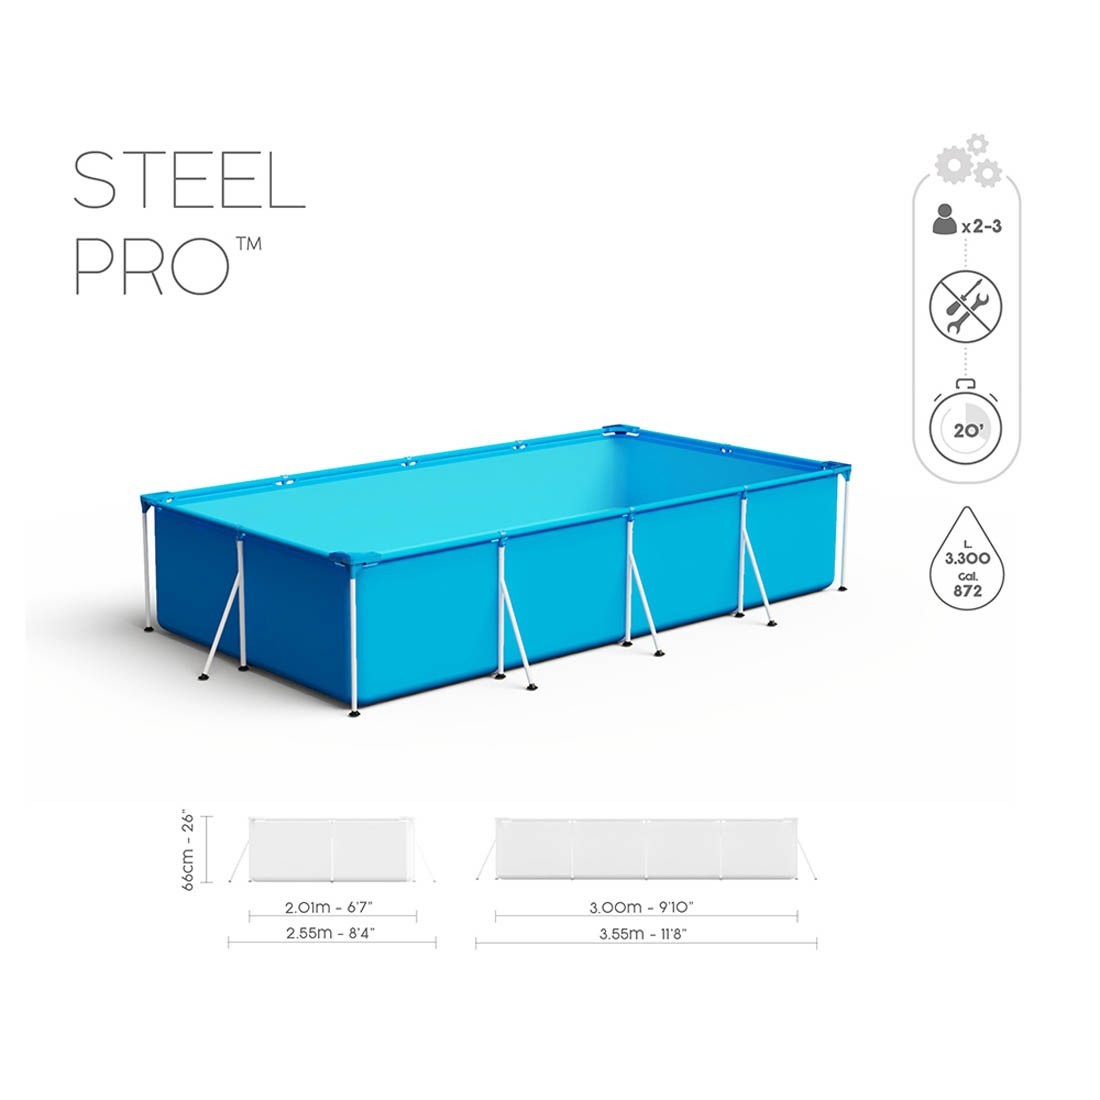 Buy Bestway Steel Pro Rectangular Deluxe Frame 3meter - Bestway, delivered  to your home | TheOutfit